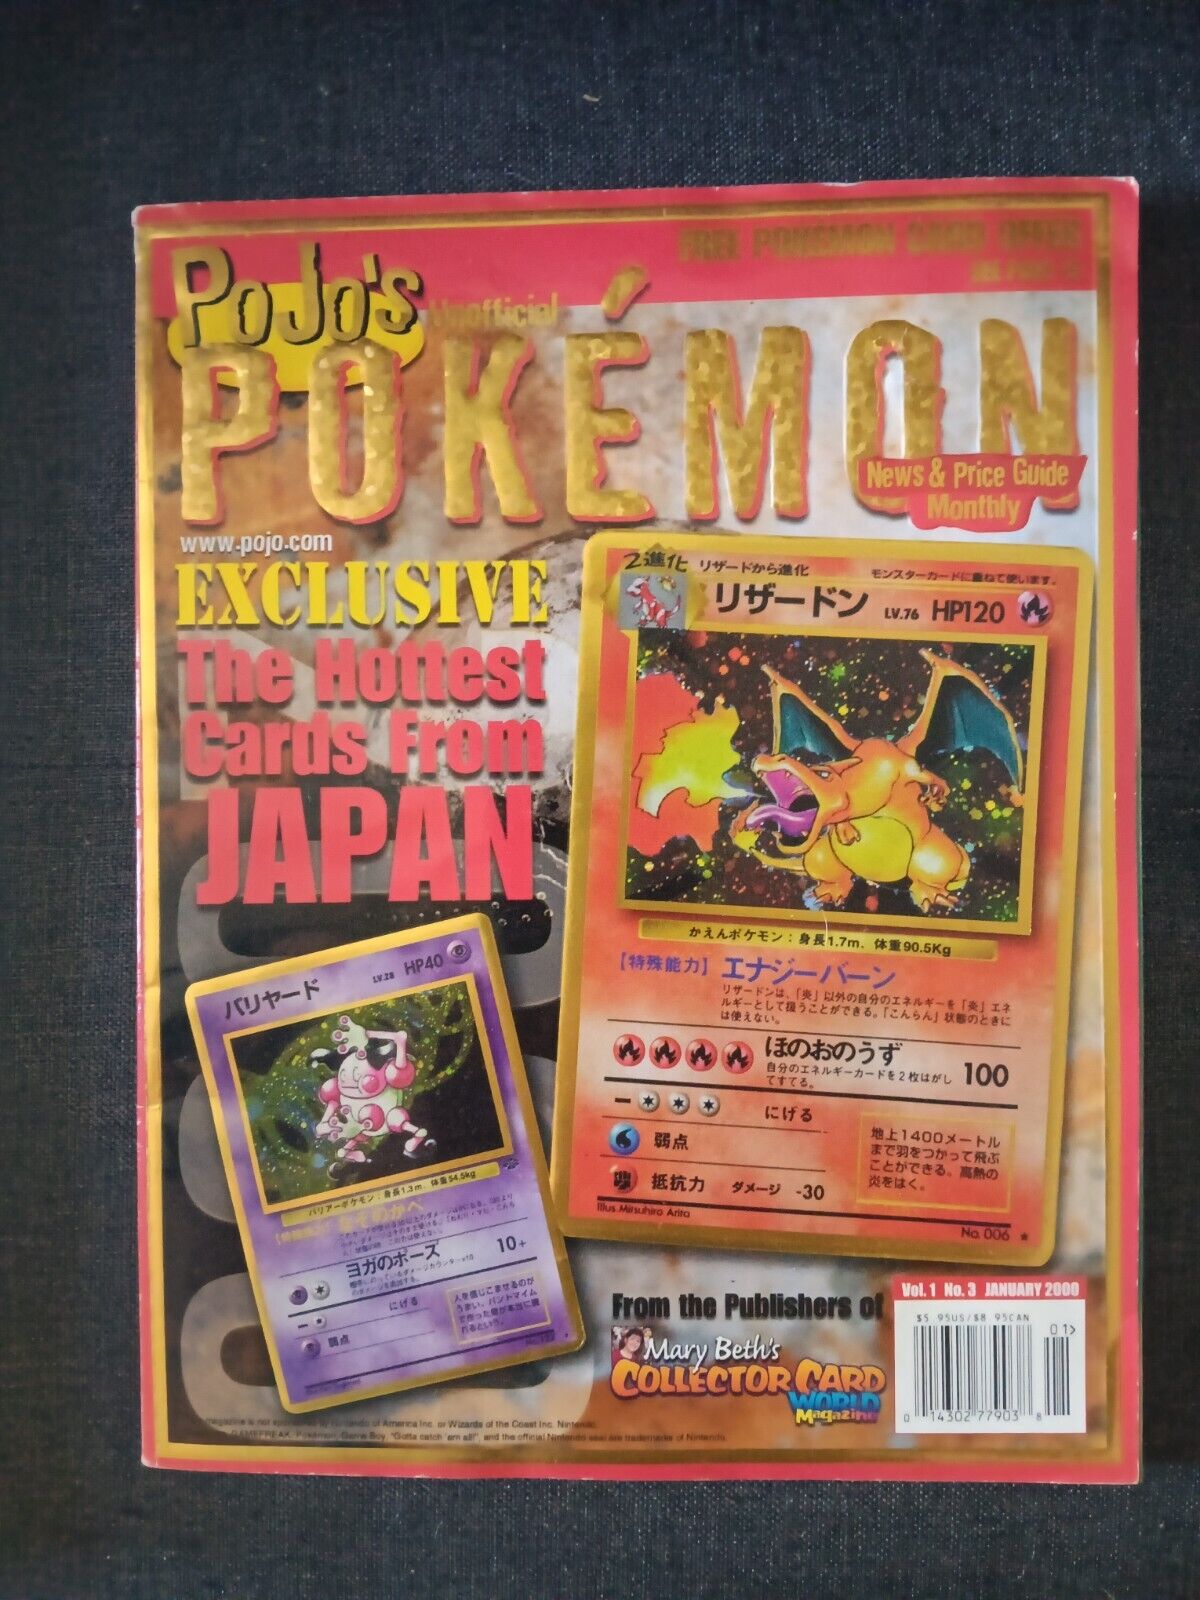 Pojo's Unofficial Pokemon News & Price Guide Monthly January 2000 Vol 1 No 3